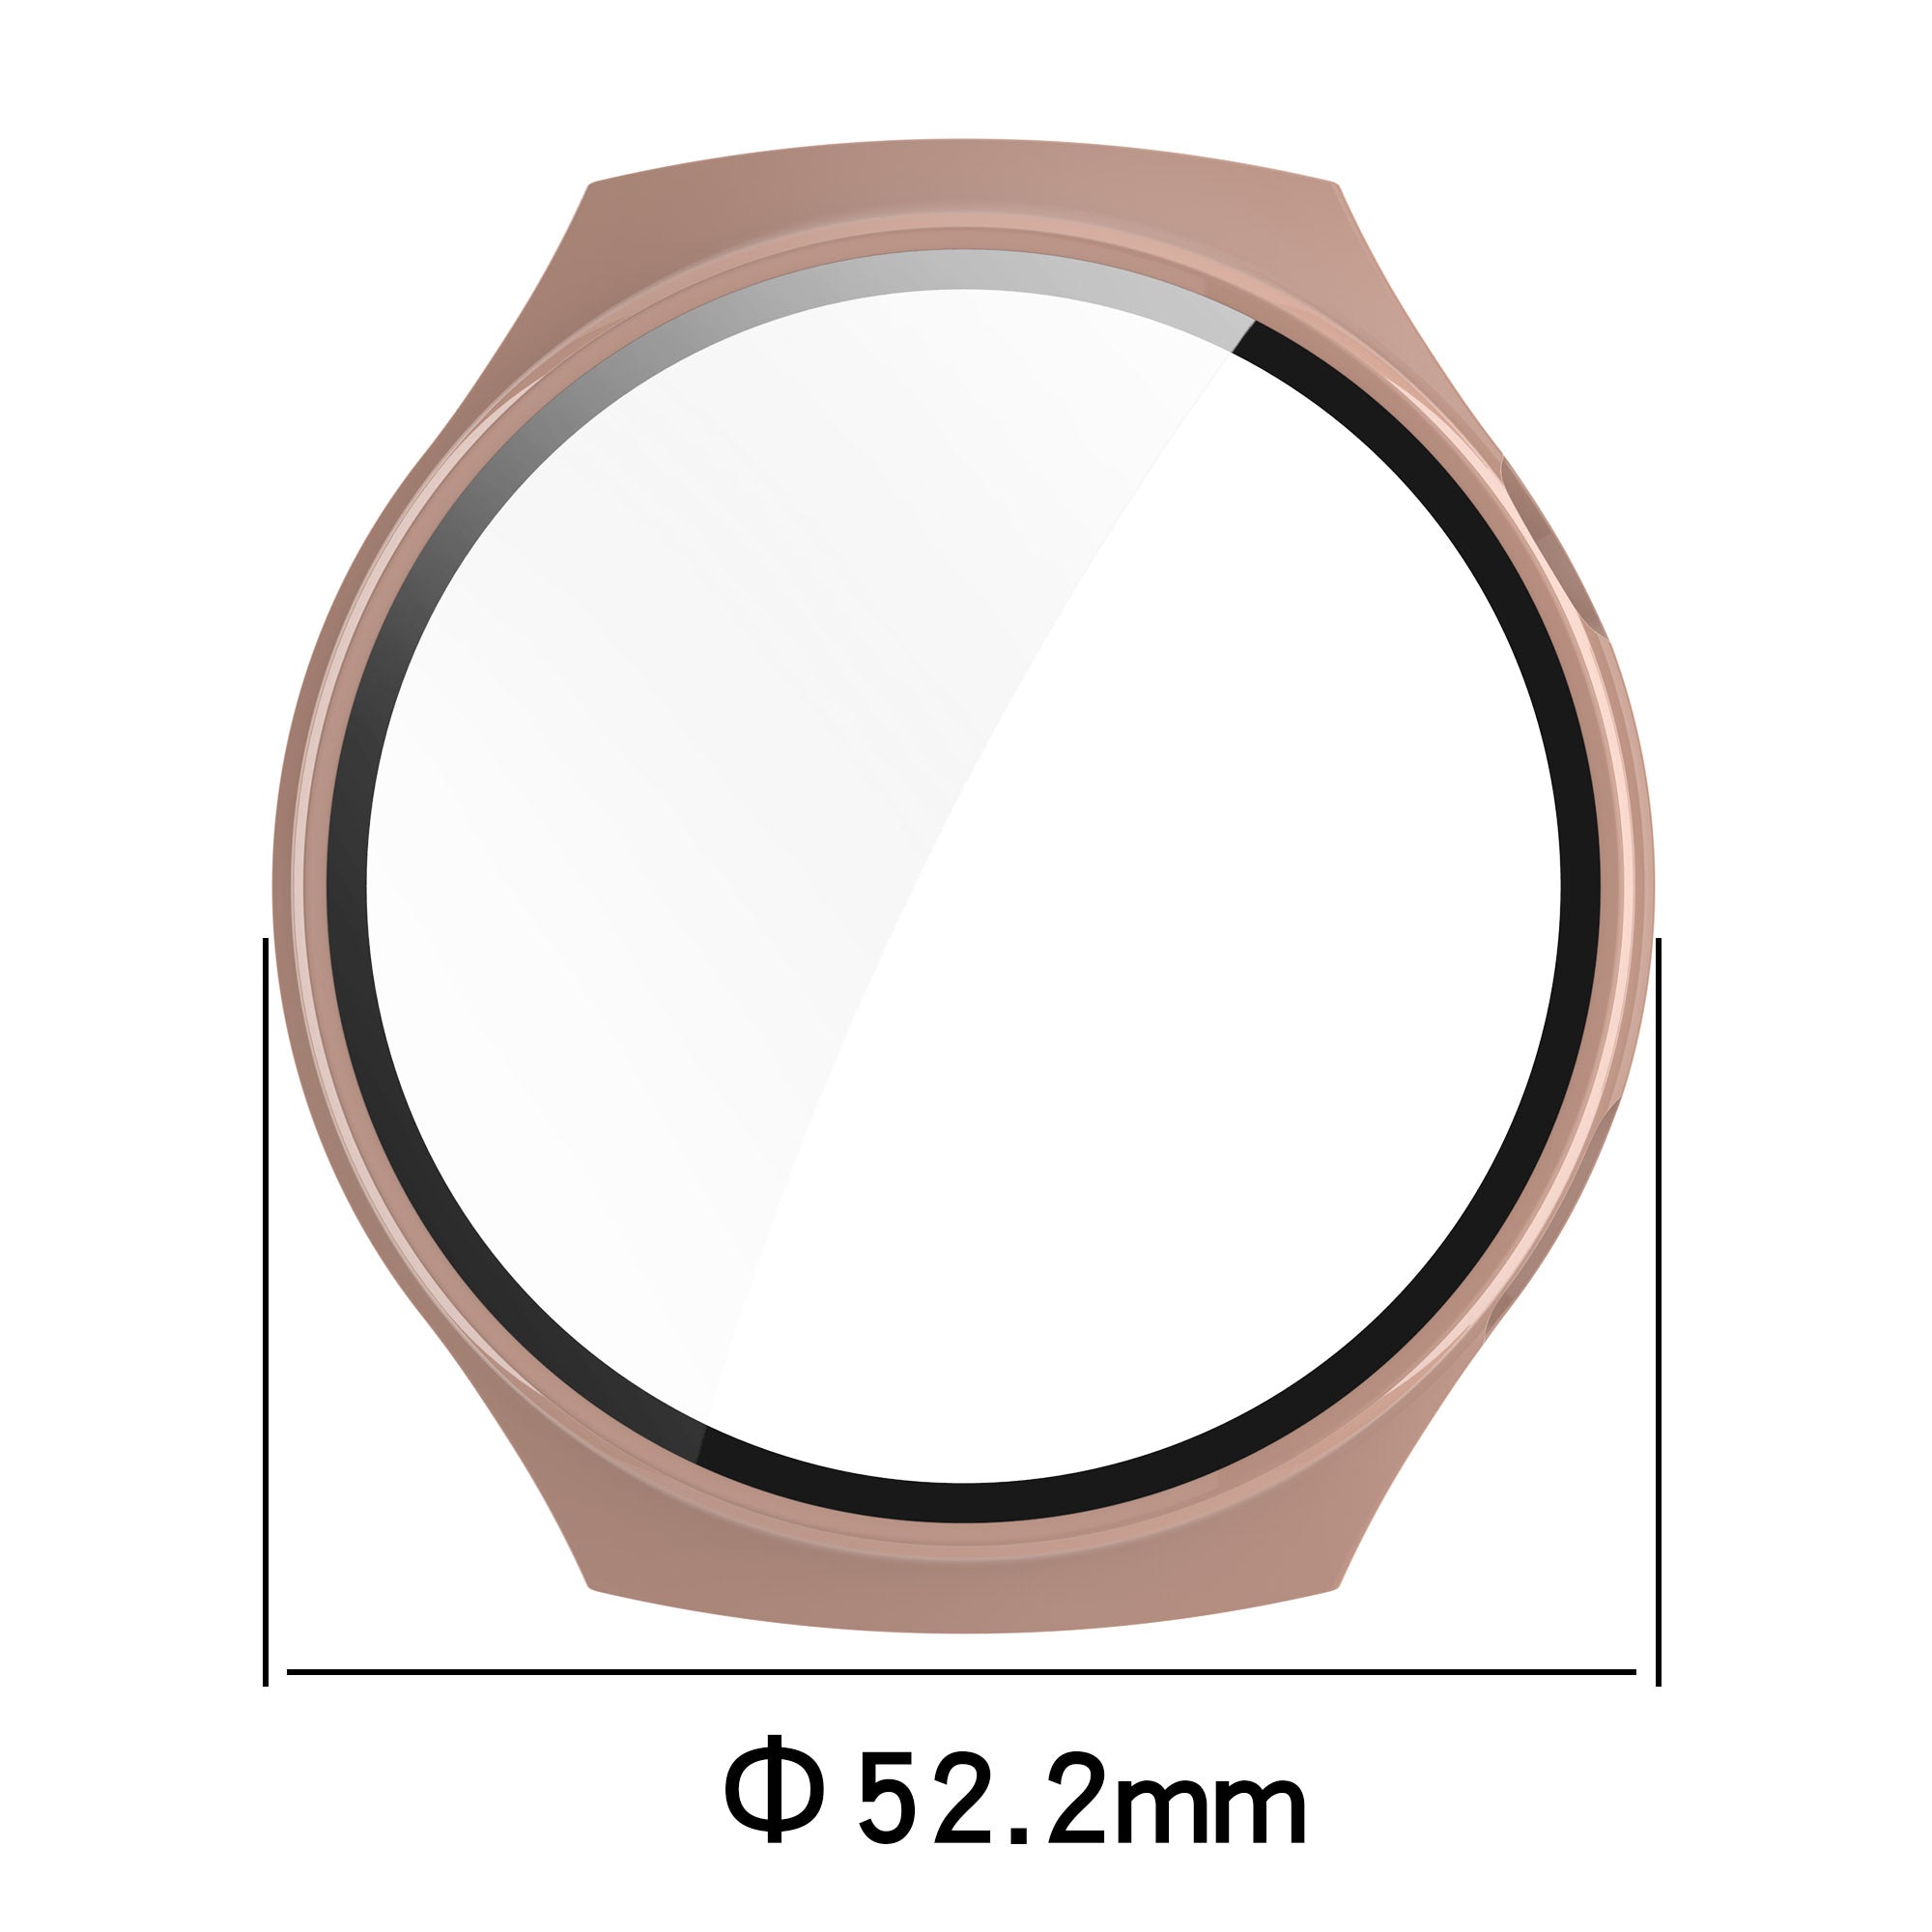 For Huawei Watch 4 Pro Case PC Cover with Curved Tempered Glass Screen Protector - Transparent White